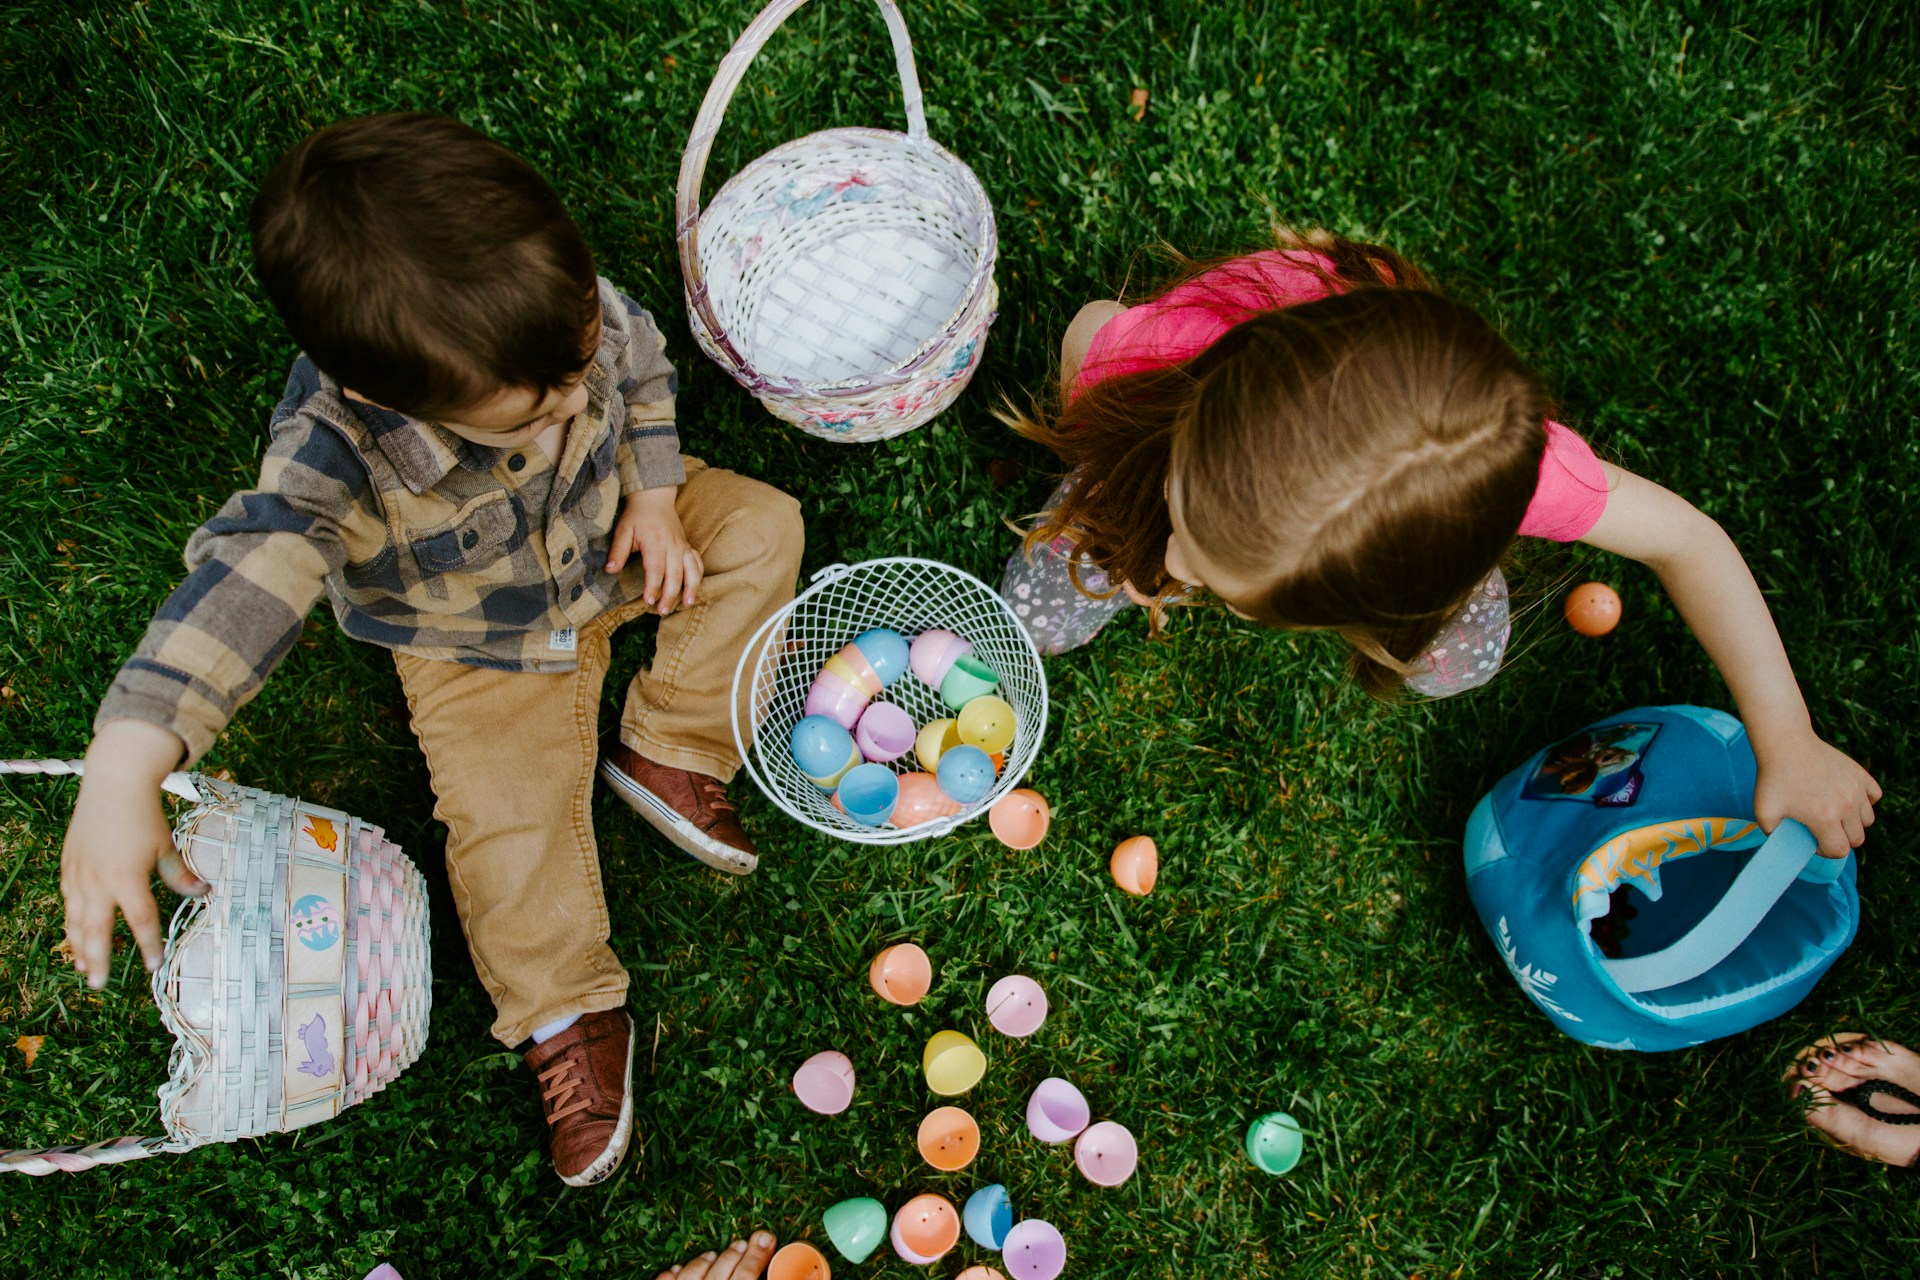 The aftermath of Easter. Two children collecting colorful easter eggs in baskets on a grassy field, viewed from above.